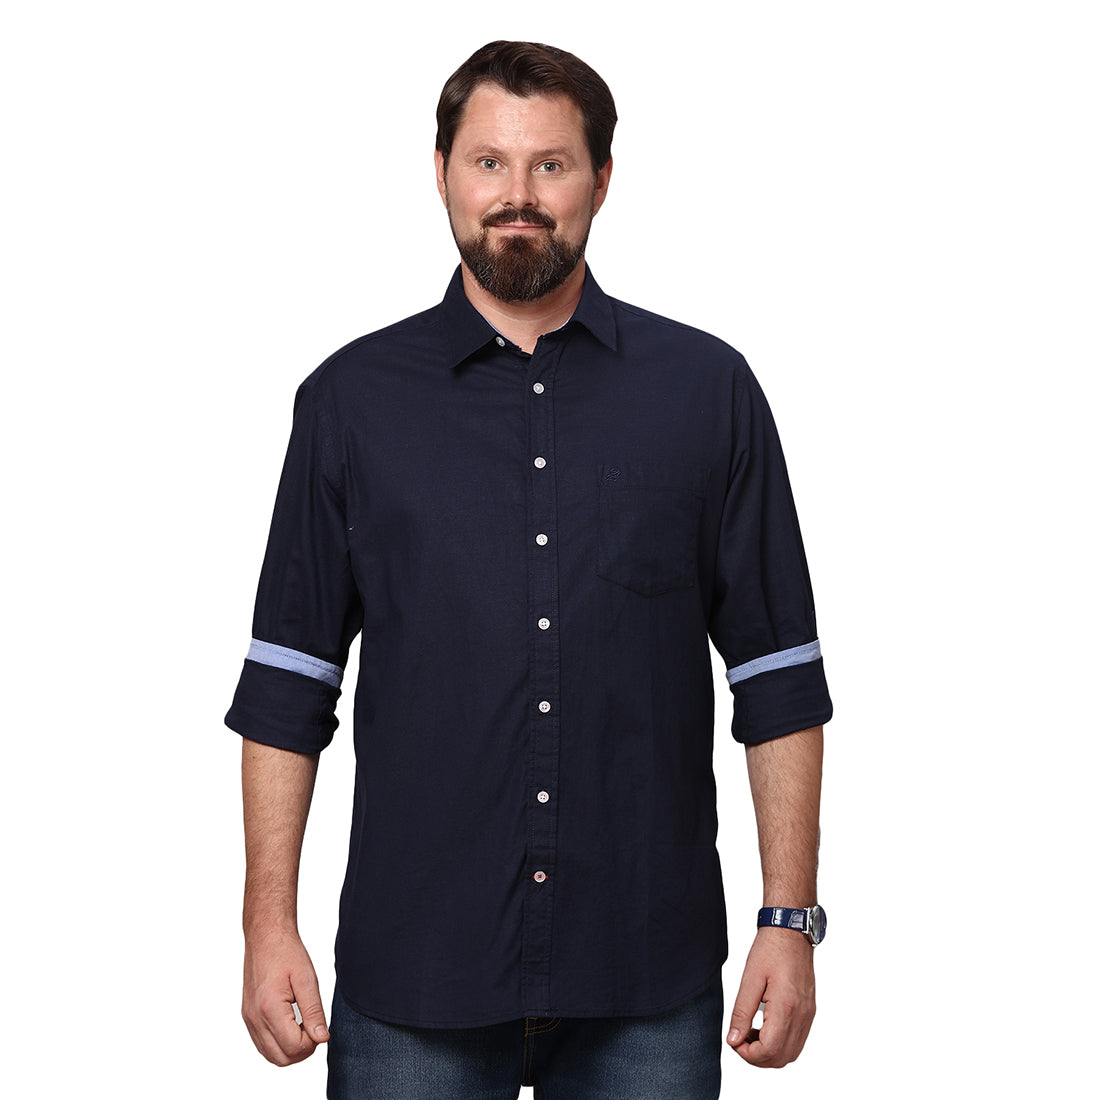 Big & Bold Solid Navy Blue Full Sleeves Slim Fit Casual Shirts (Plus Size) - Double Two